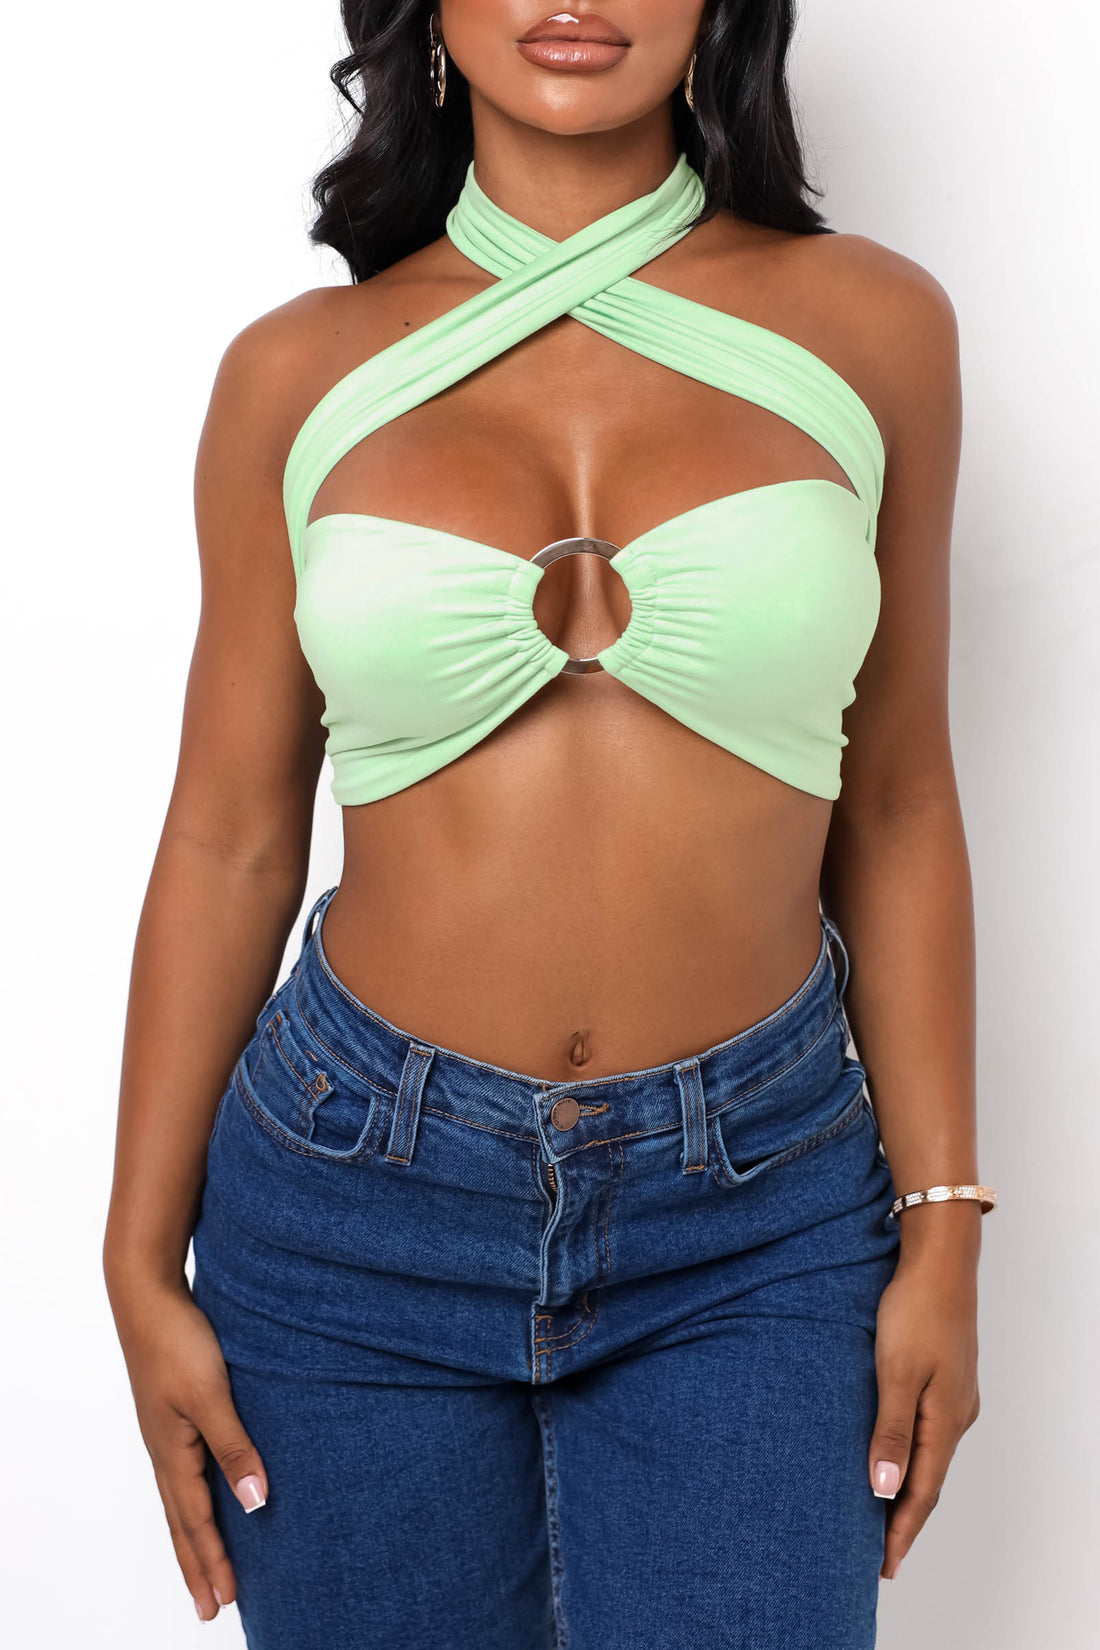 stadig Ups band A Versatile Crop Top - Mint – My Outfit Online